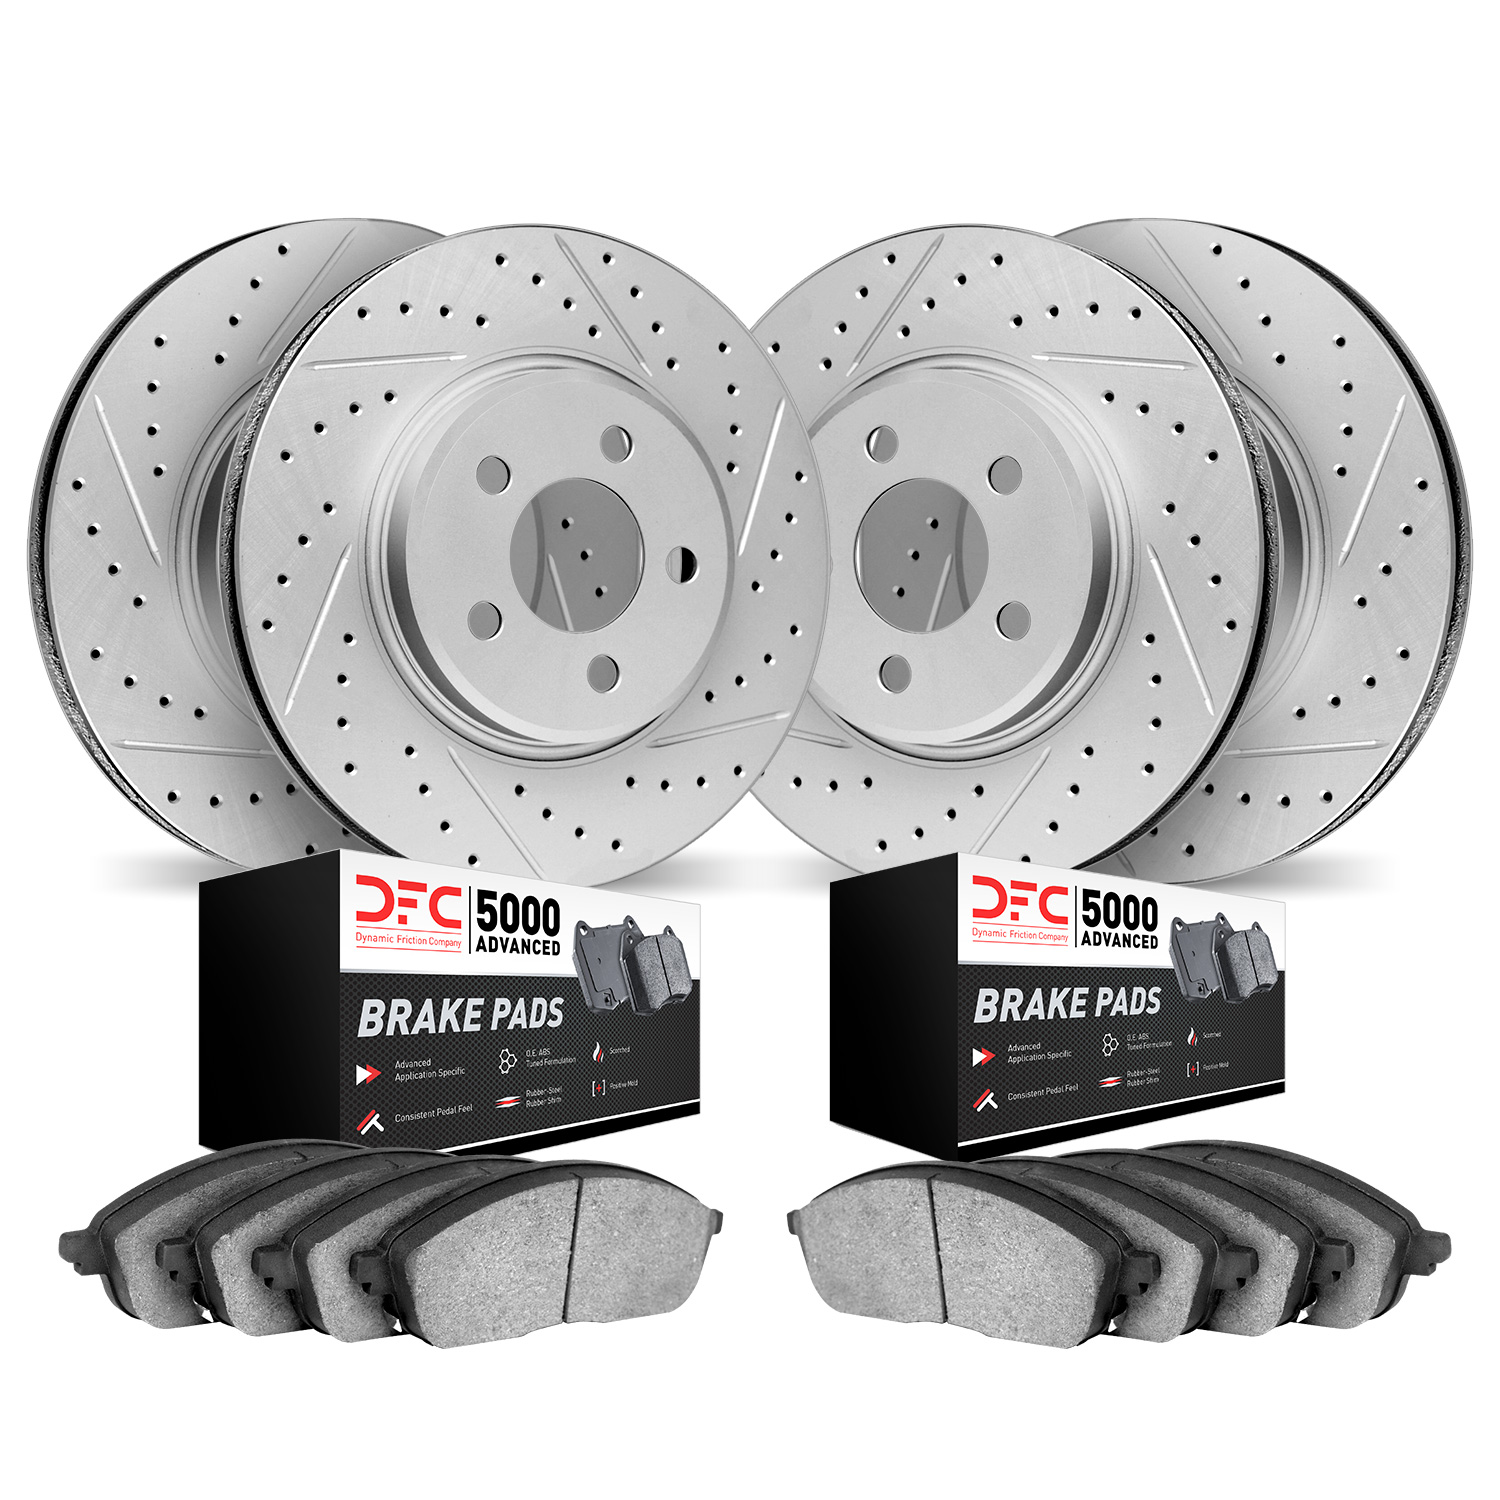 2504-75025 Geoperformance Drilled/Slotted Rotors w/5000 Advanced Brake Pads Kit, 2007-2017 Lexus/Toyota/Scion, Position: Front a